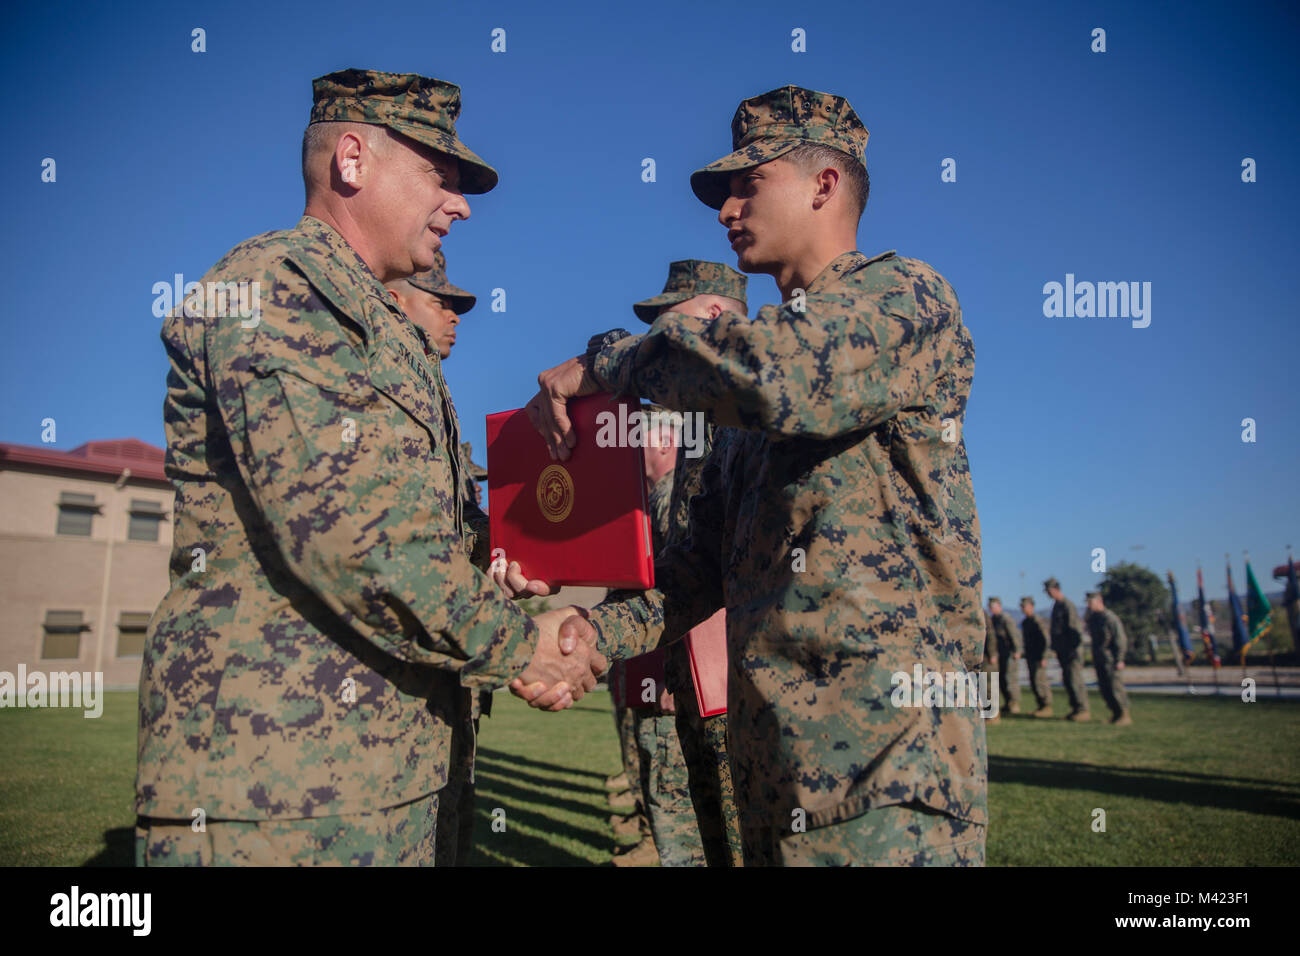 Lance Cpl. Rudy Huerta, a combat engineer with 7th Engineer Support Battalion, 1st Marine Logistics Group, is awarded the Marine of the Quarter award by Brig. Gen Stephen Sklenka, the commanding general for the 1st MLG, during a quarterly awards ceremony at Camp Pendleton, Calif., Feb. 8, 2018. The awards ceremony allows Marines and Sailors of the 1st MLG to be recognized and awarded for their exemplary service and performance in their duties. (U.S. Marine Corps photo by Cpl. Adam Dublinske) Stock Photo